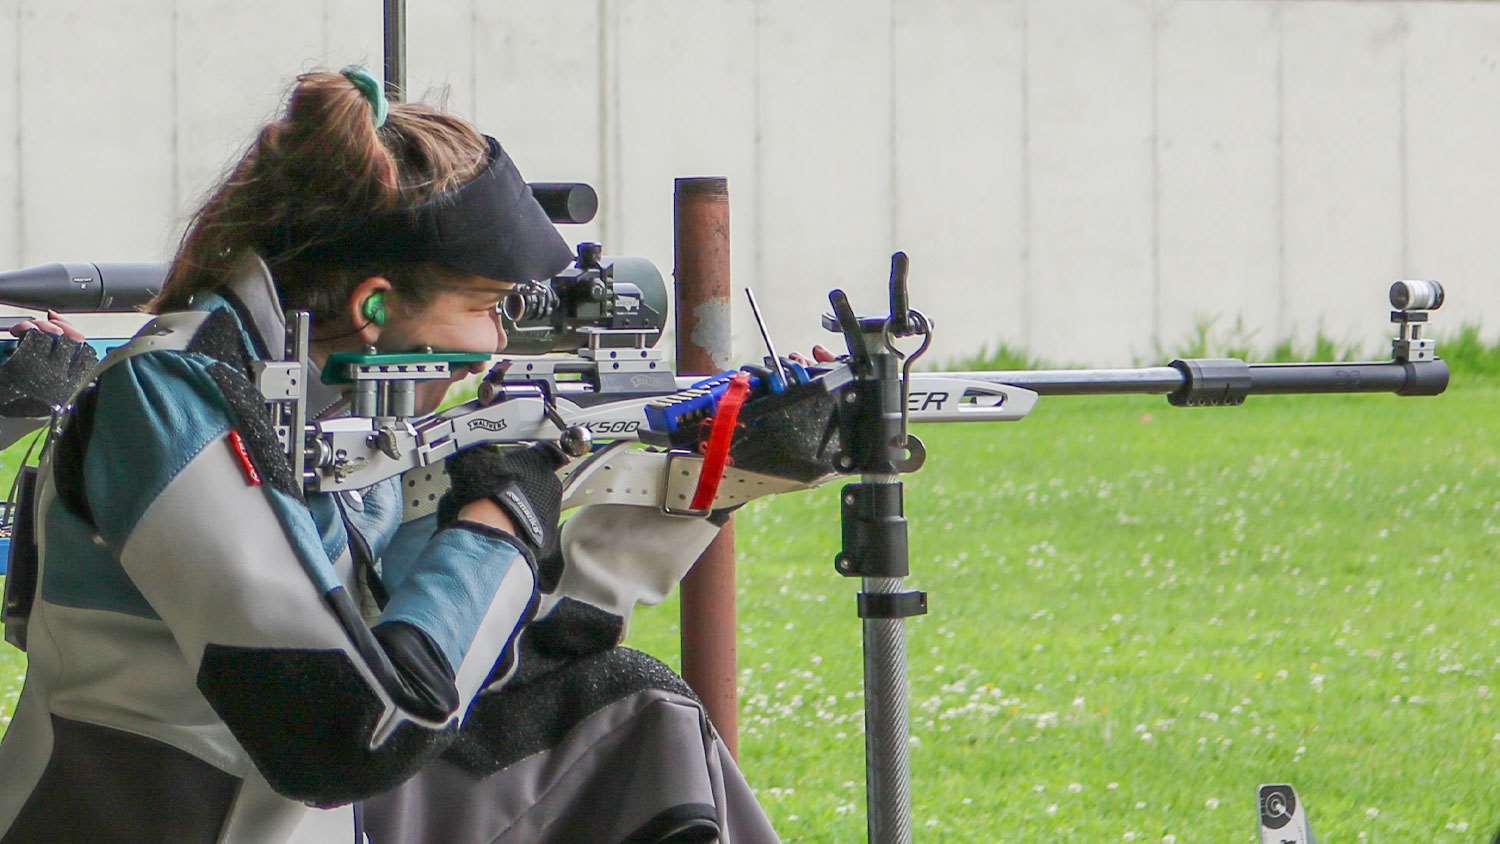 M’Leah Lambdin on the firing line during the 2019 NRA Smallbore Rifle 3-Position Nationals.